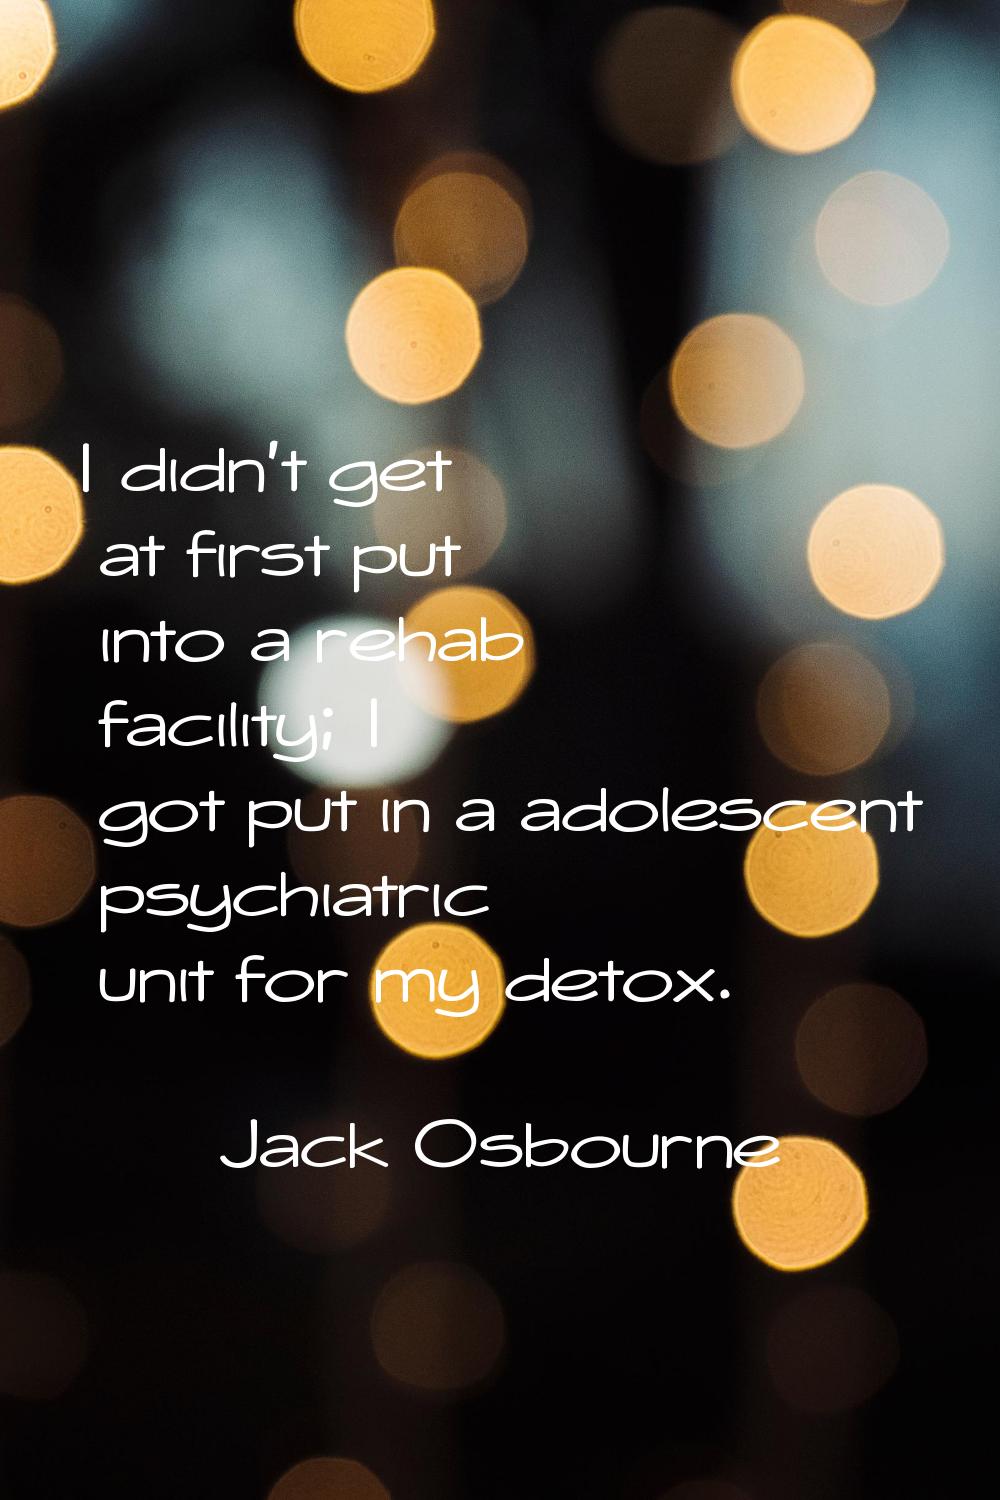 I didn't get at first put into a rehab facility; I got put in a adolescent psychiatric unit for my 